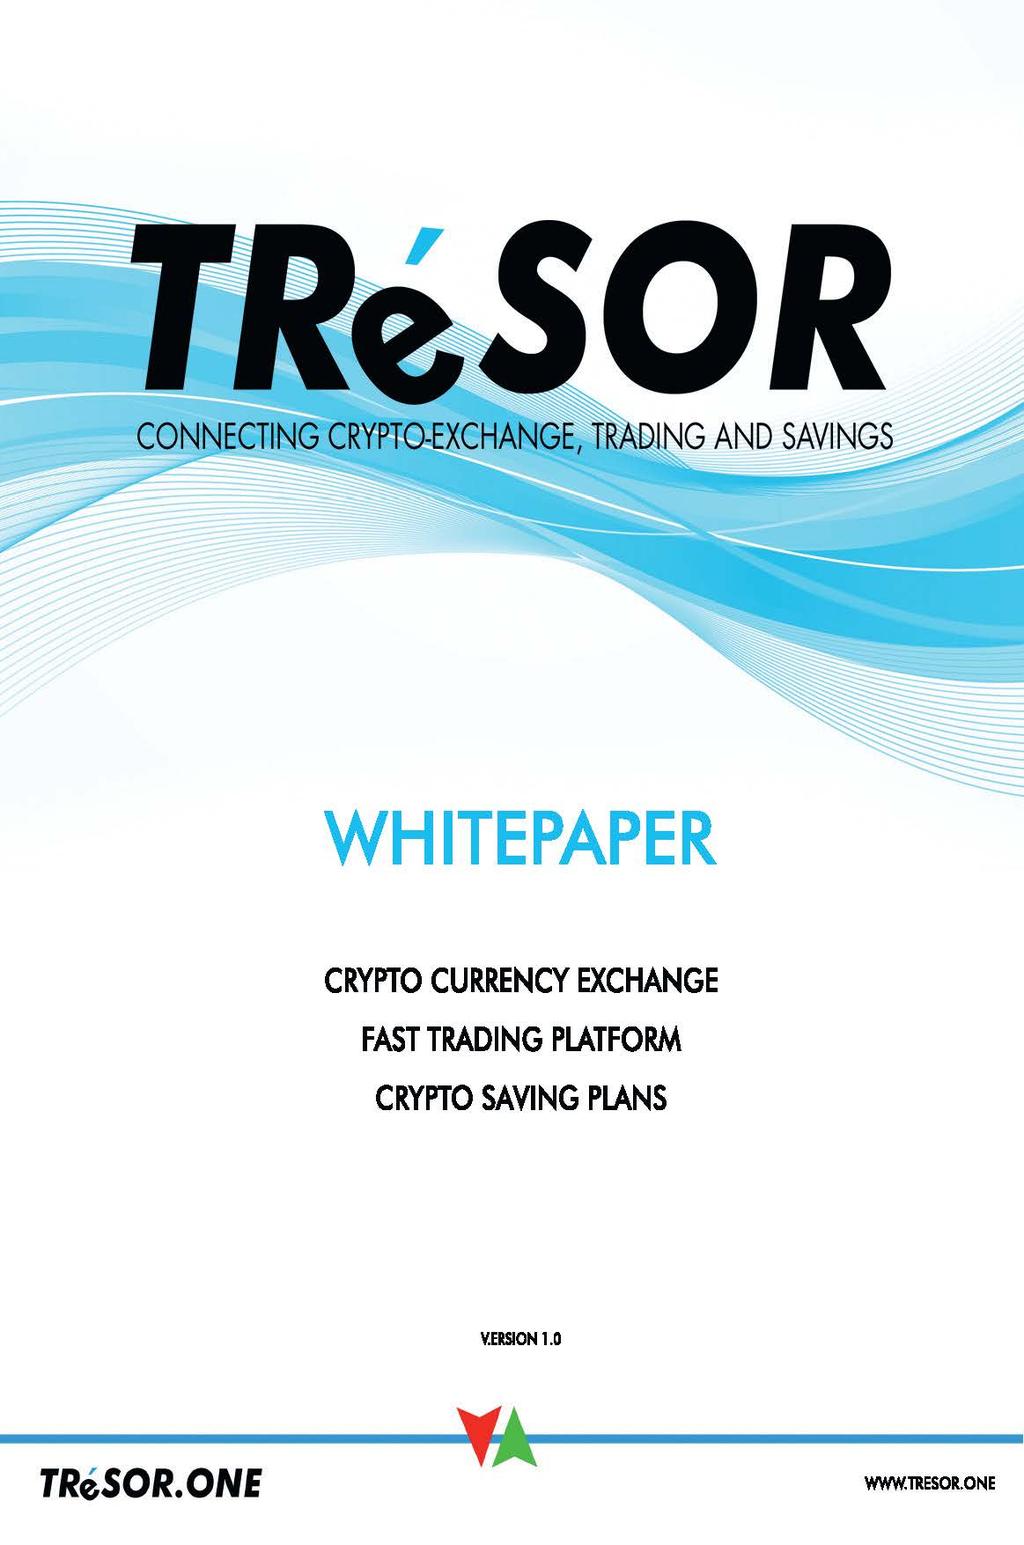 AND SAVINGS ~ WHITEPAPER CRYPTO CURRENCY EXCHANGE FAST TRADING PLATFORM